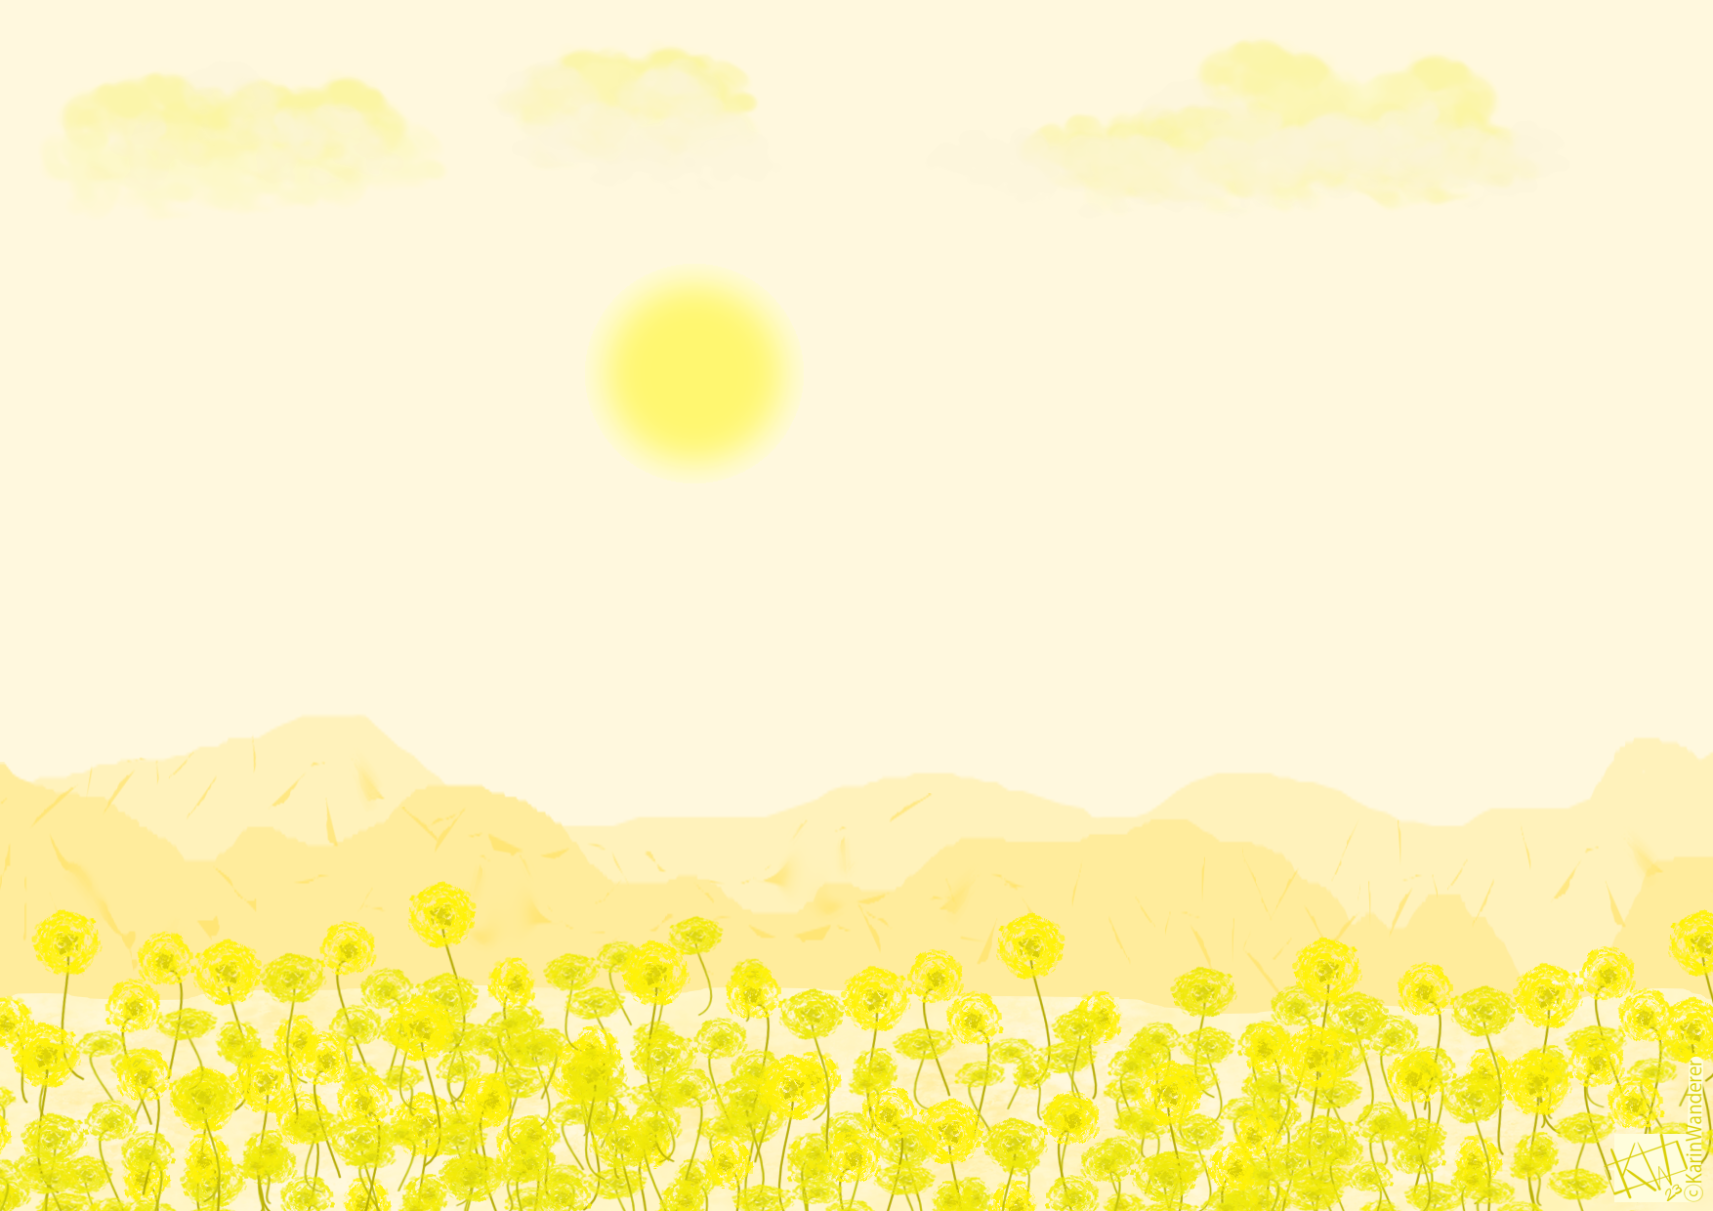 Digital monochrome yellow drawing of a superbloom of yellow flowers in the desert. The sun beats down, the fw clouds in the sky do nothing to block it.  The mountain chains in the distance seem hazy.